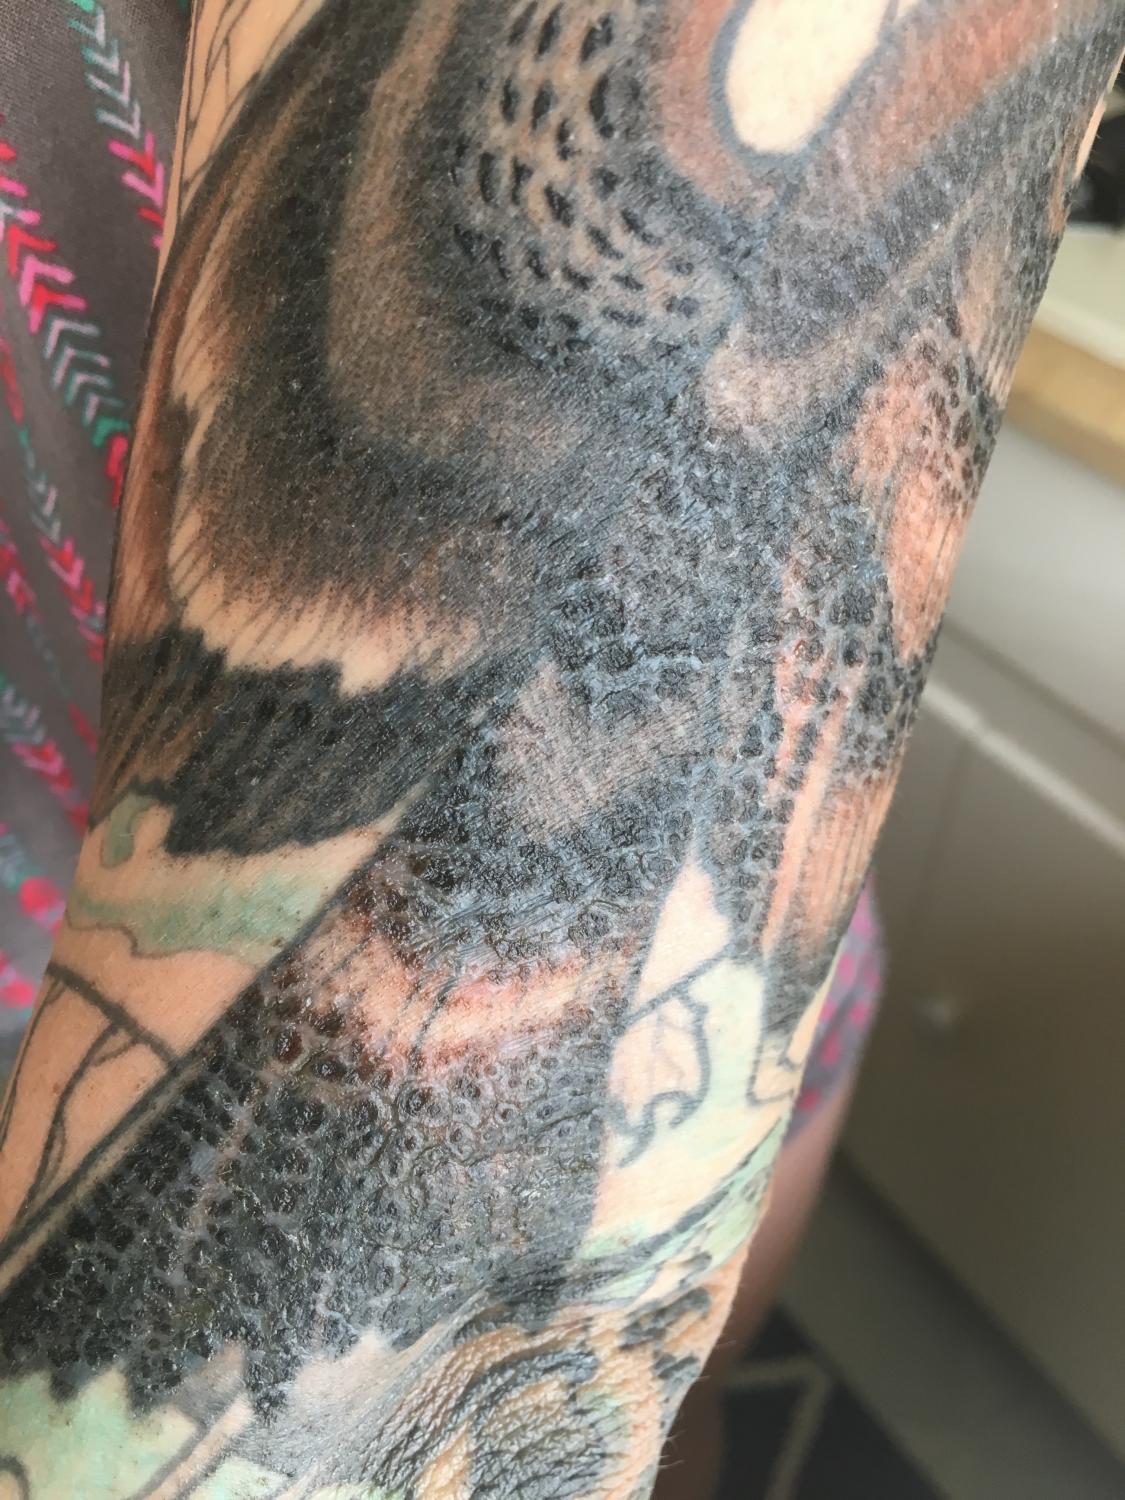 Should You Be Concerned If Your New Tattoo Is Leaking Fluid